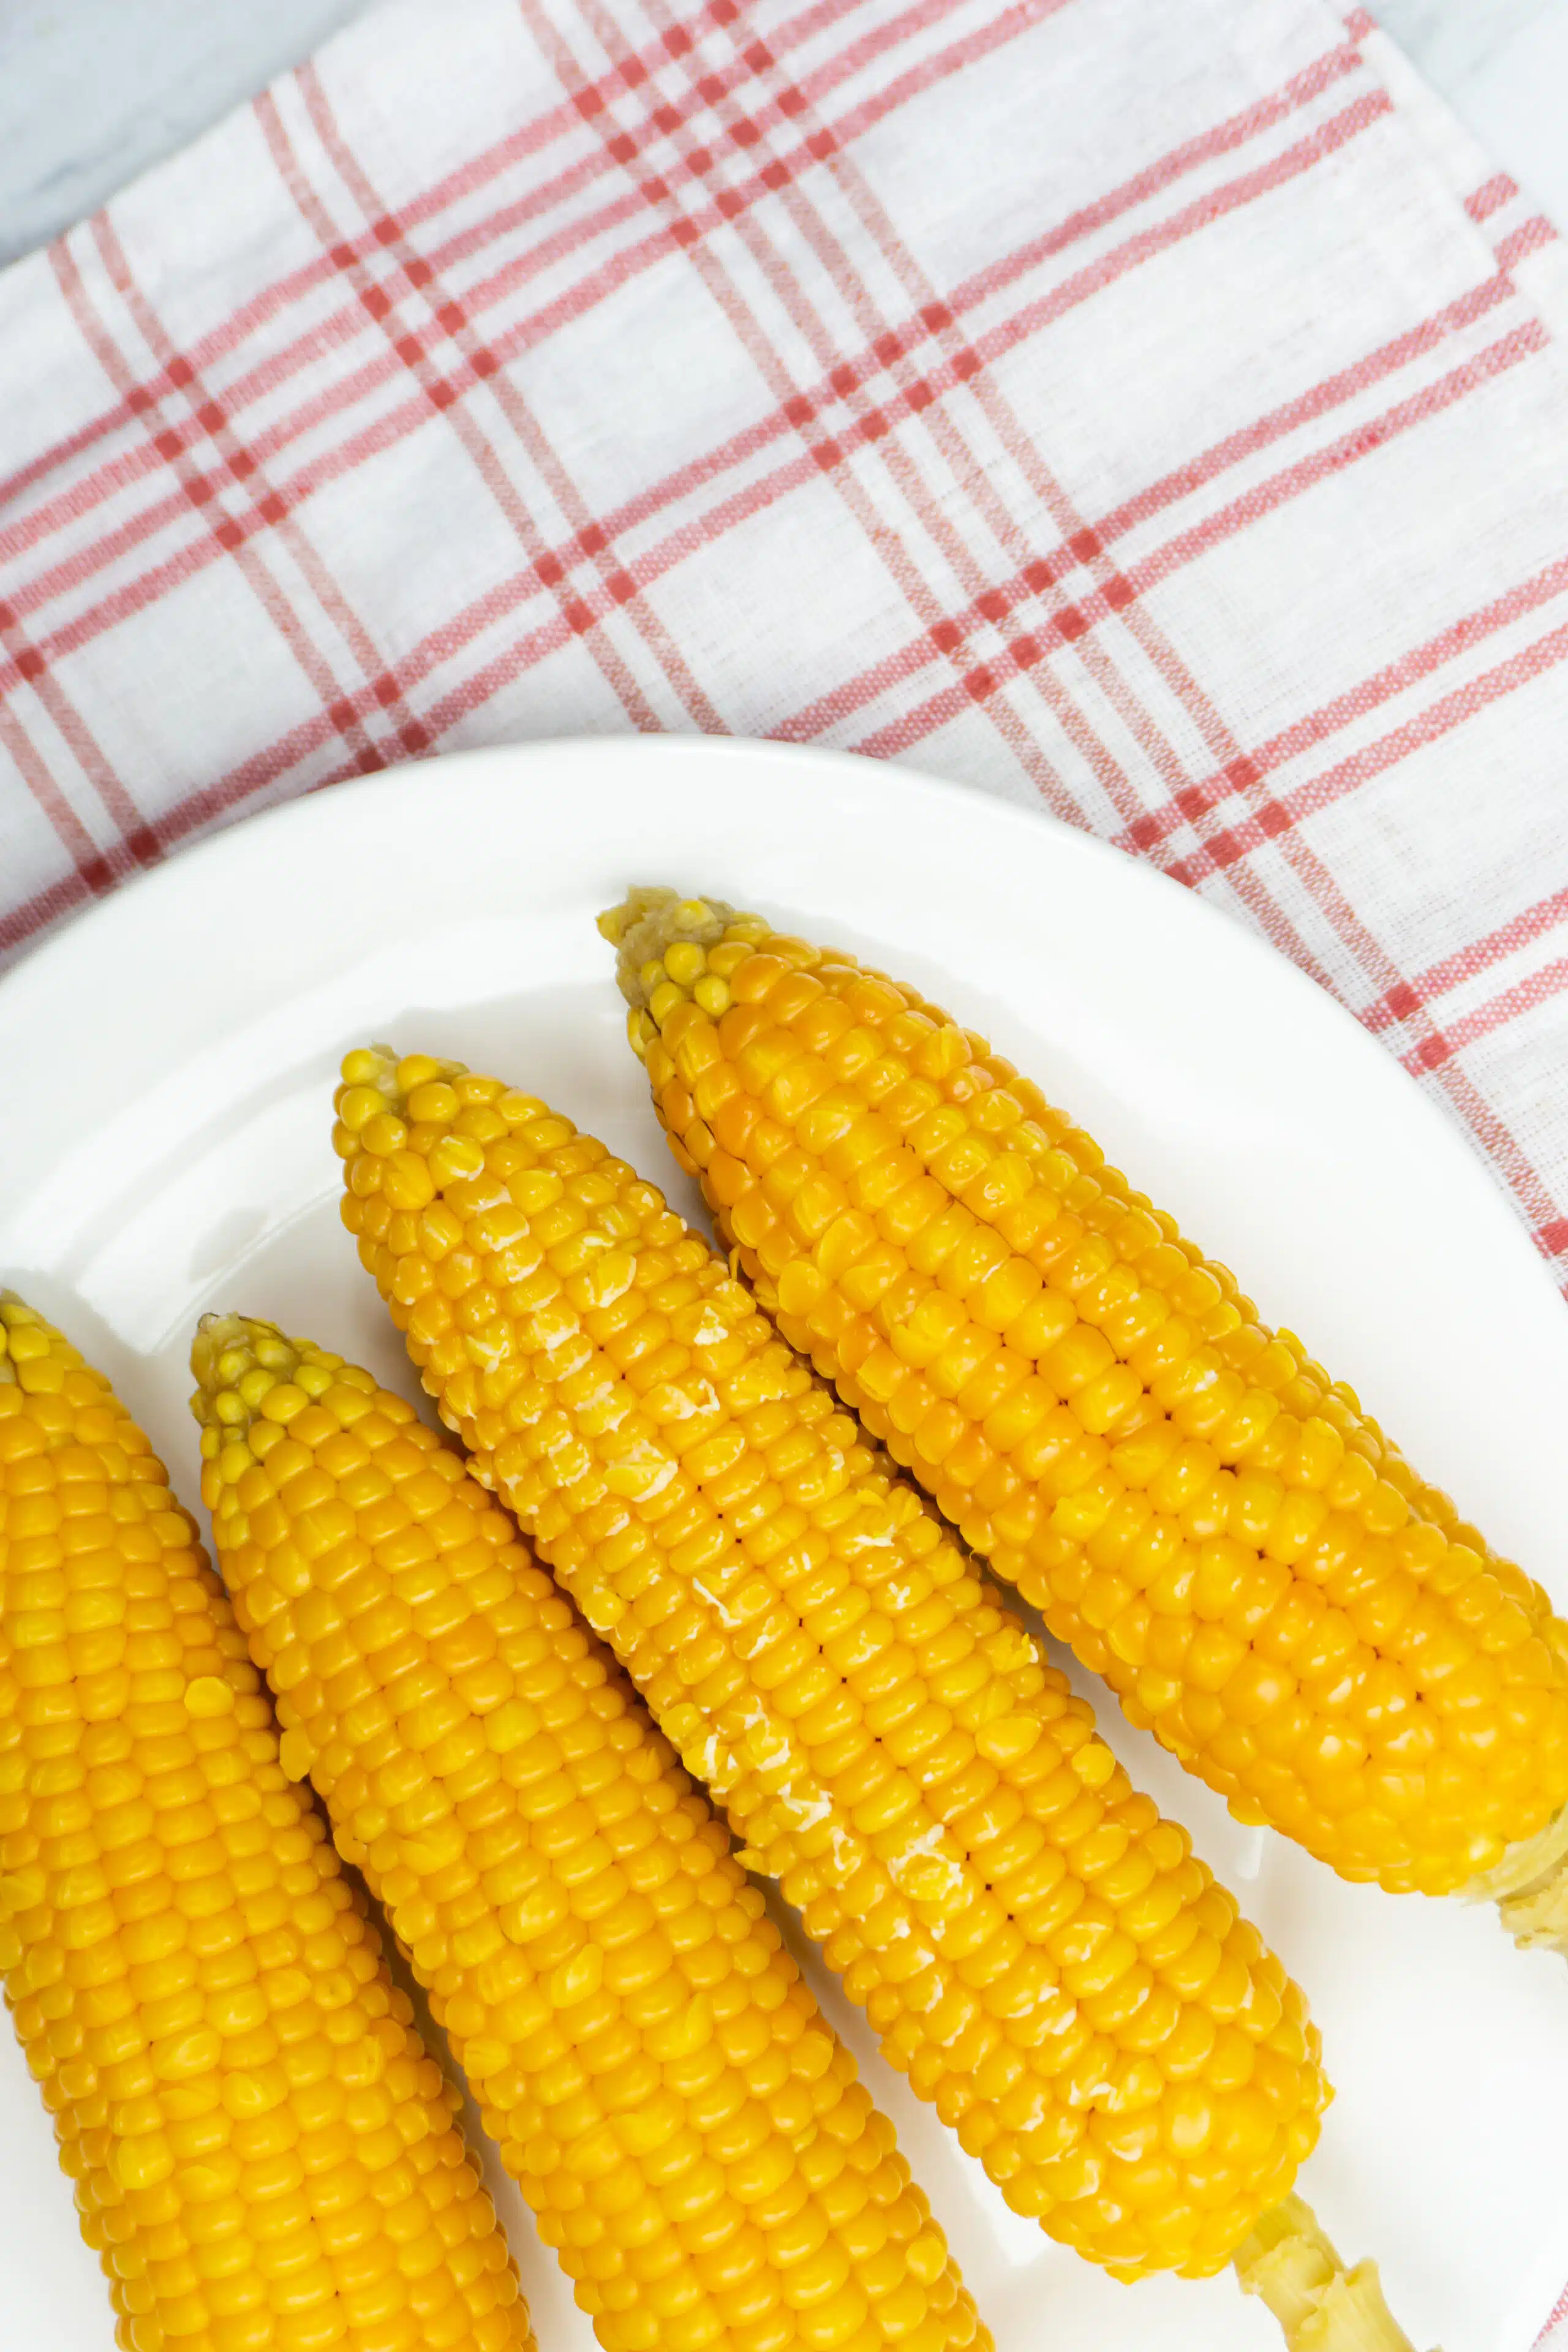 4 corn on the cob on a white plate with chequered tea towel background